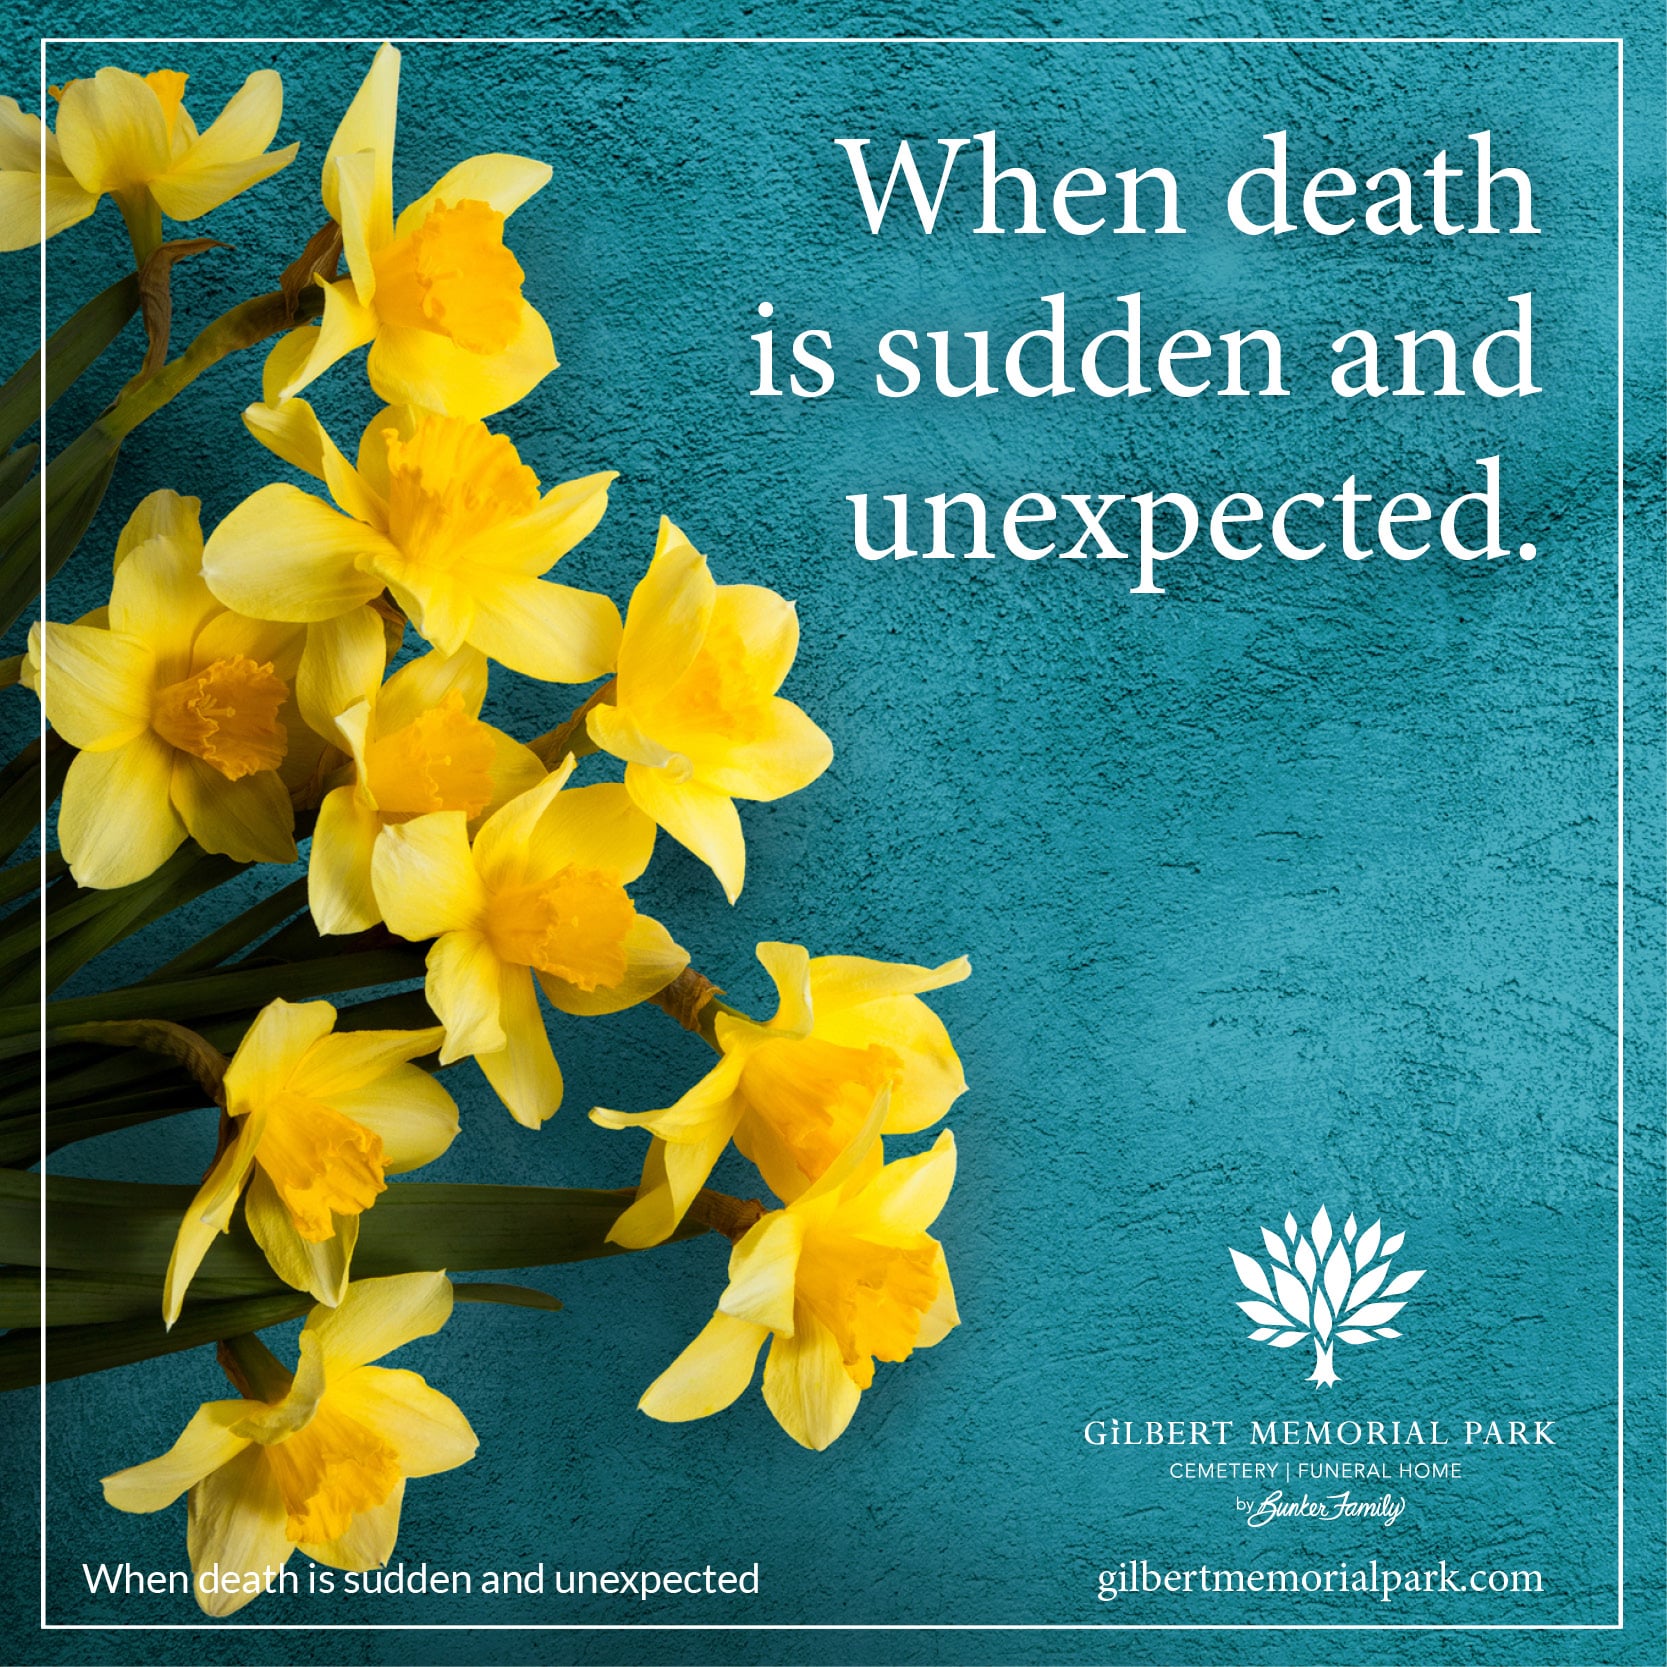 When the Soul Leaves the Body… Reacting to a Sudden Unexpected Death